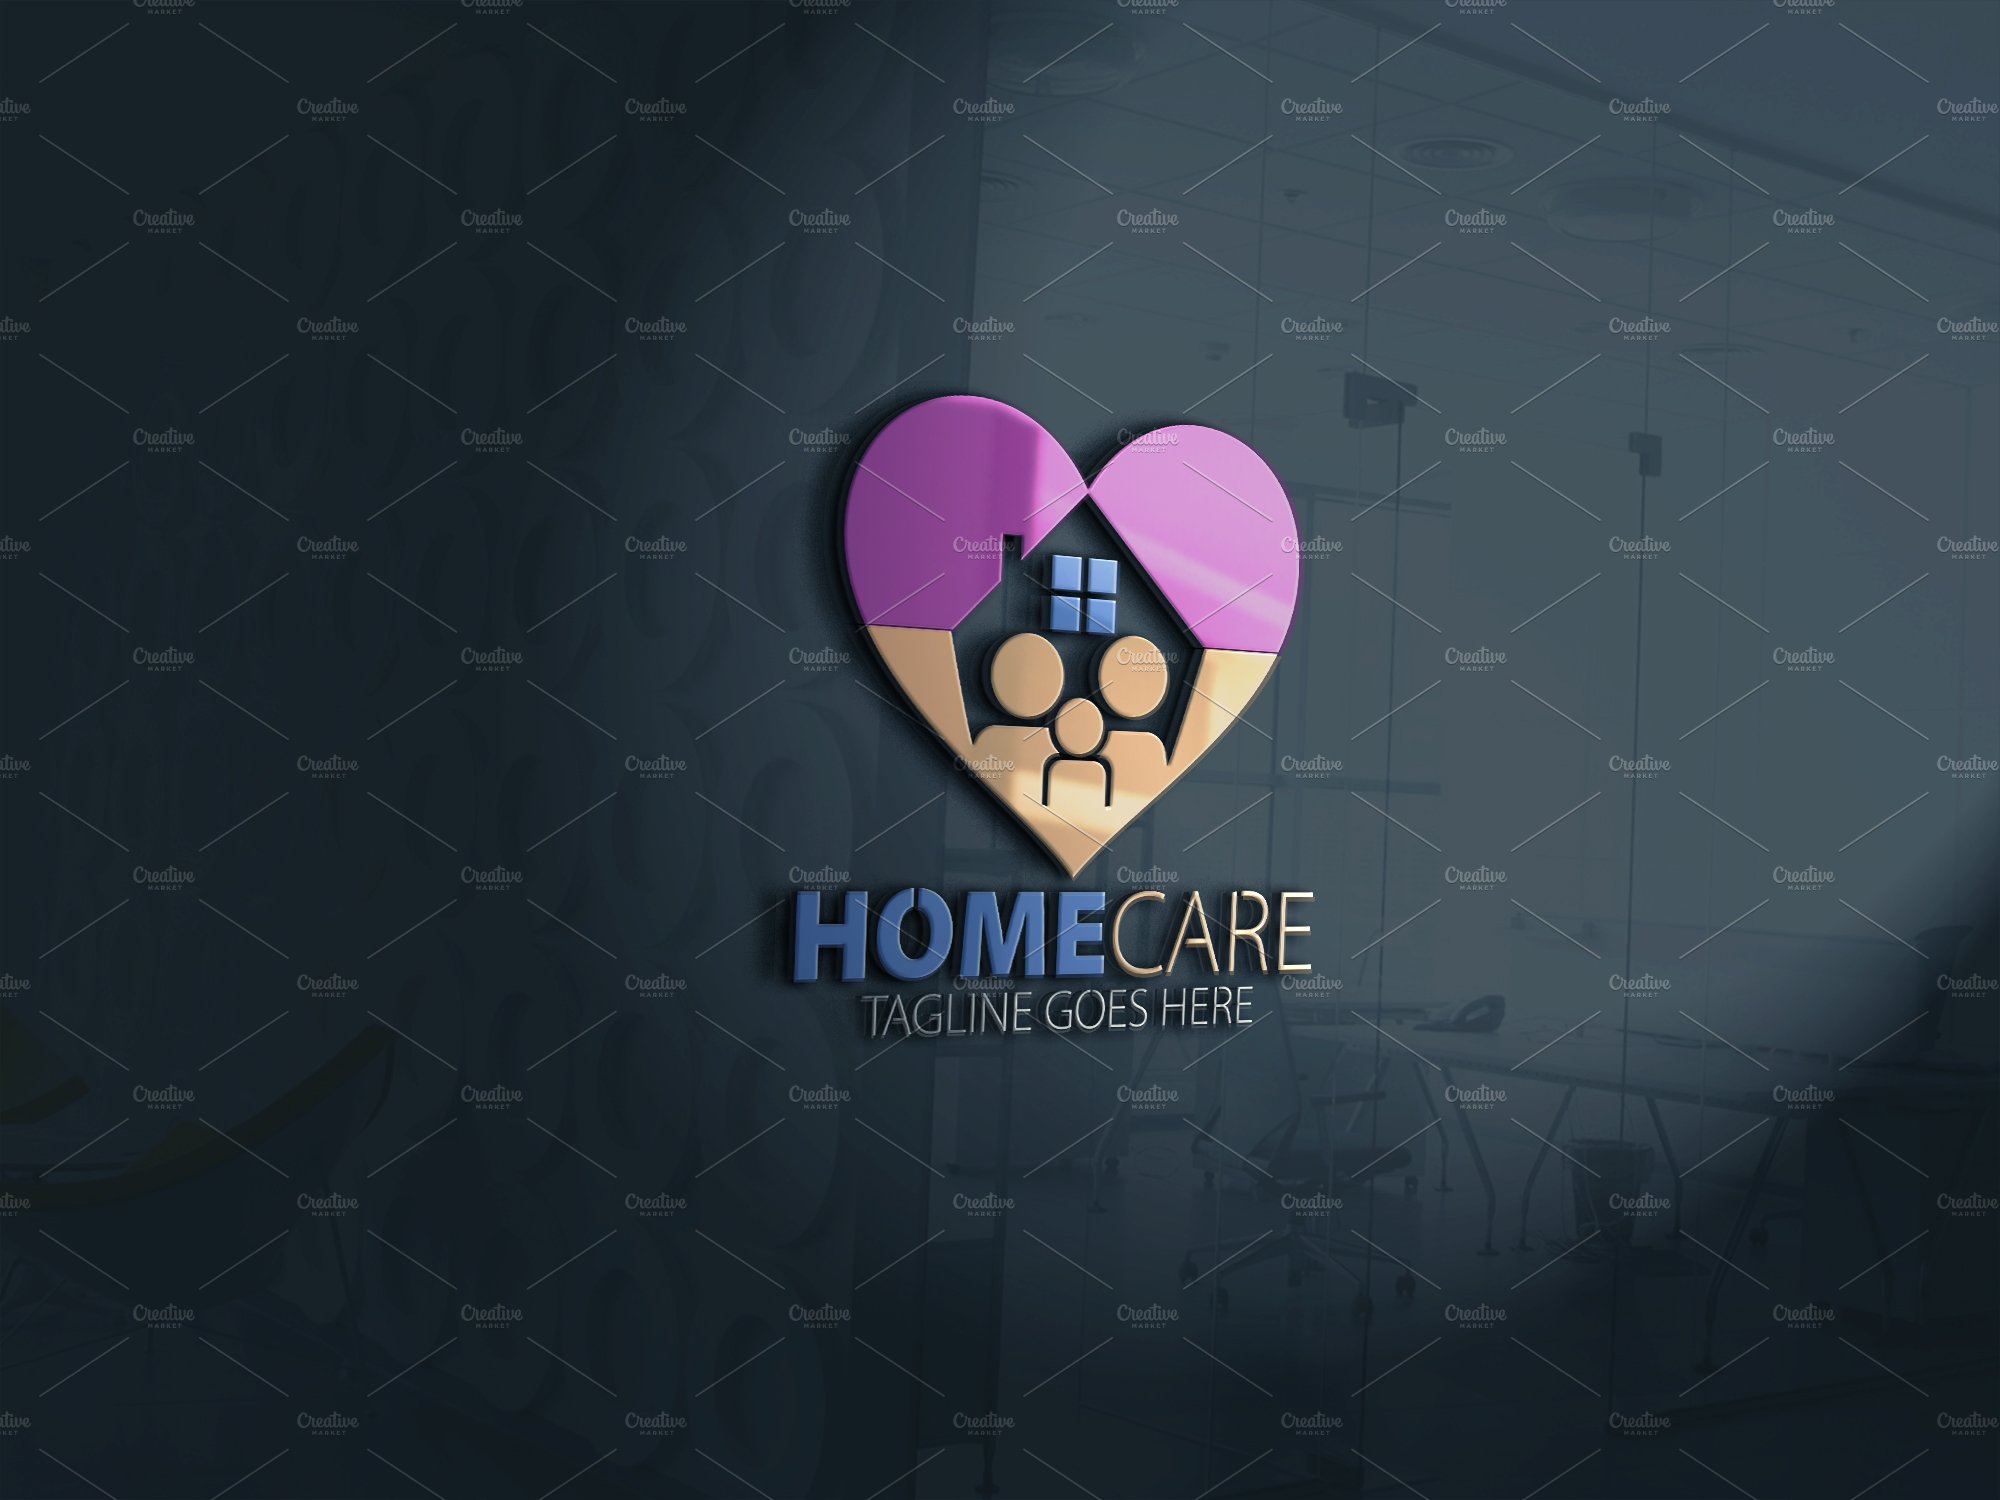 Home Care Logo Version4 cover image.